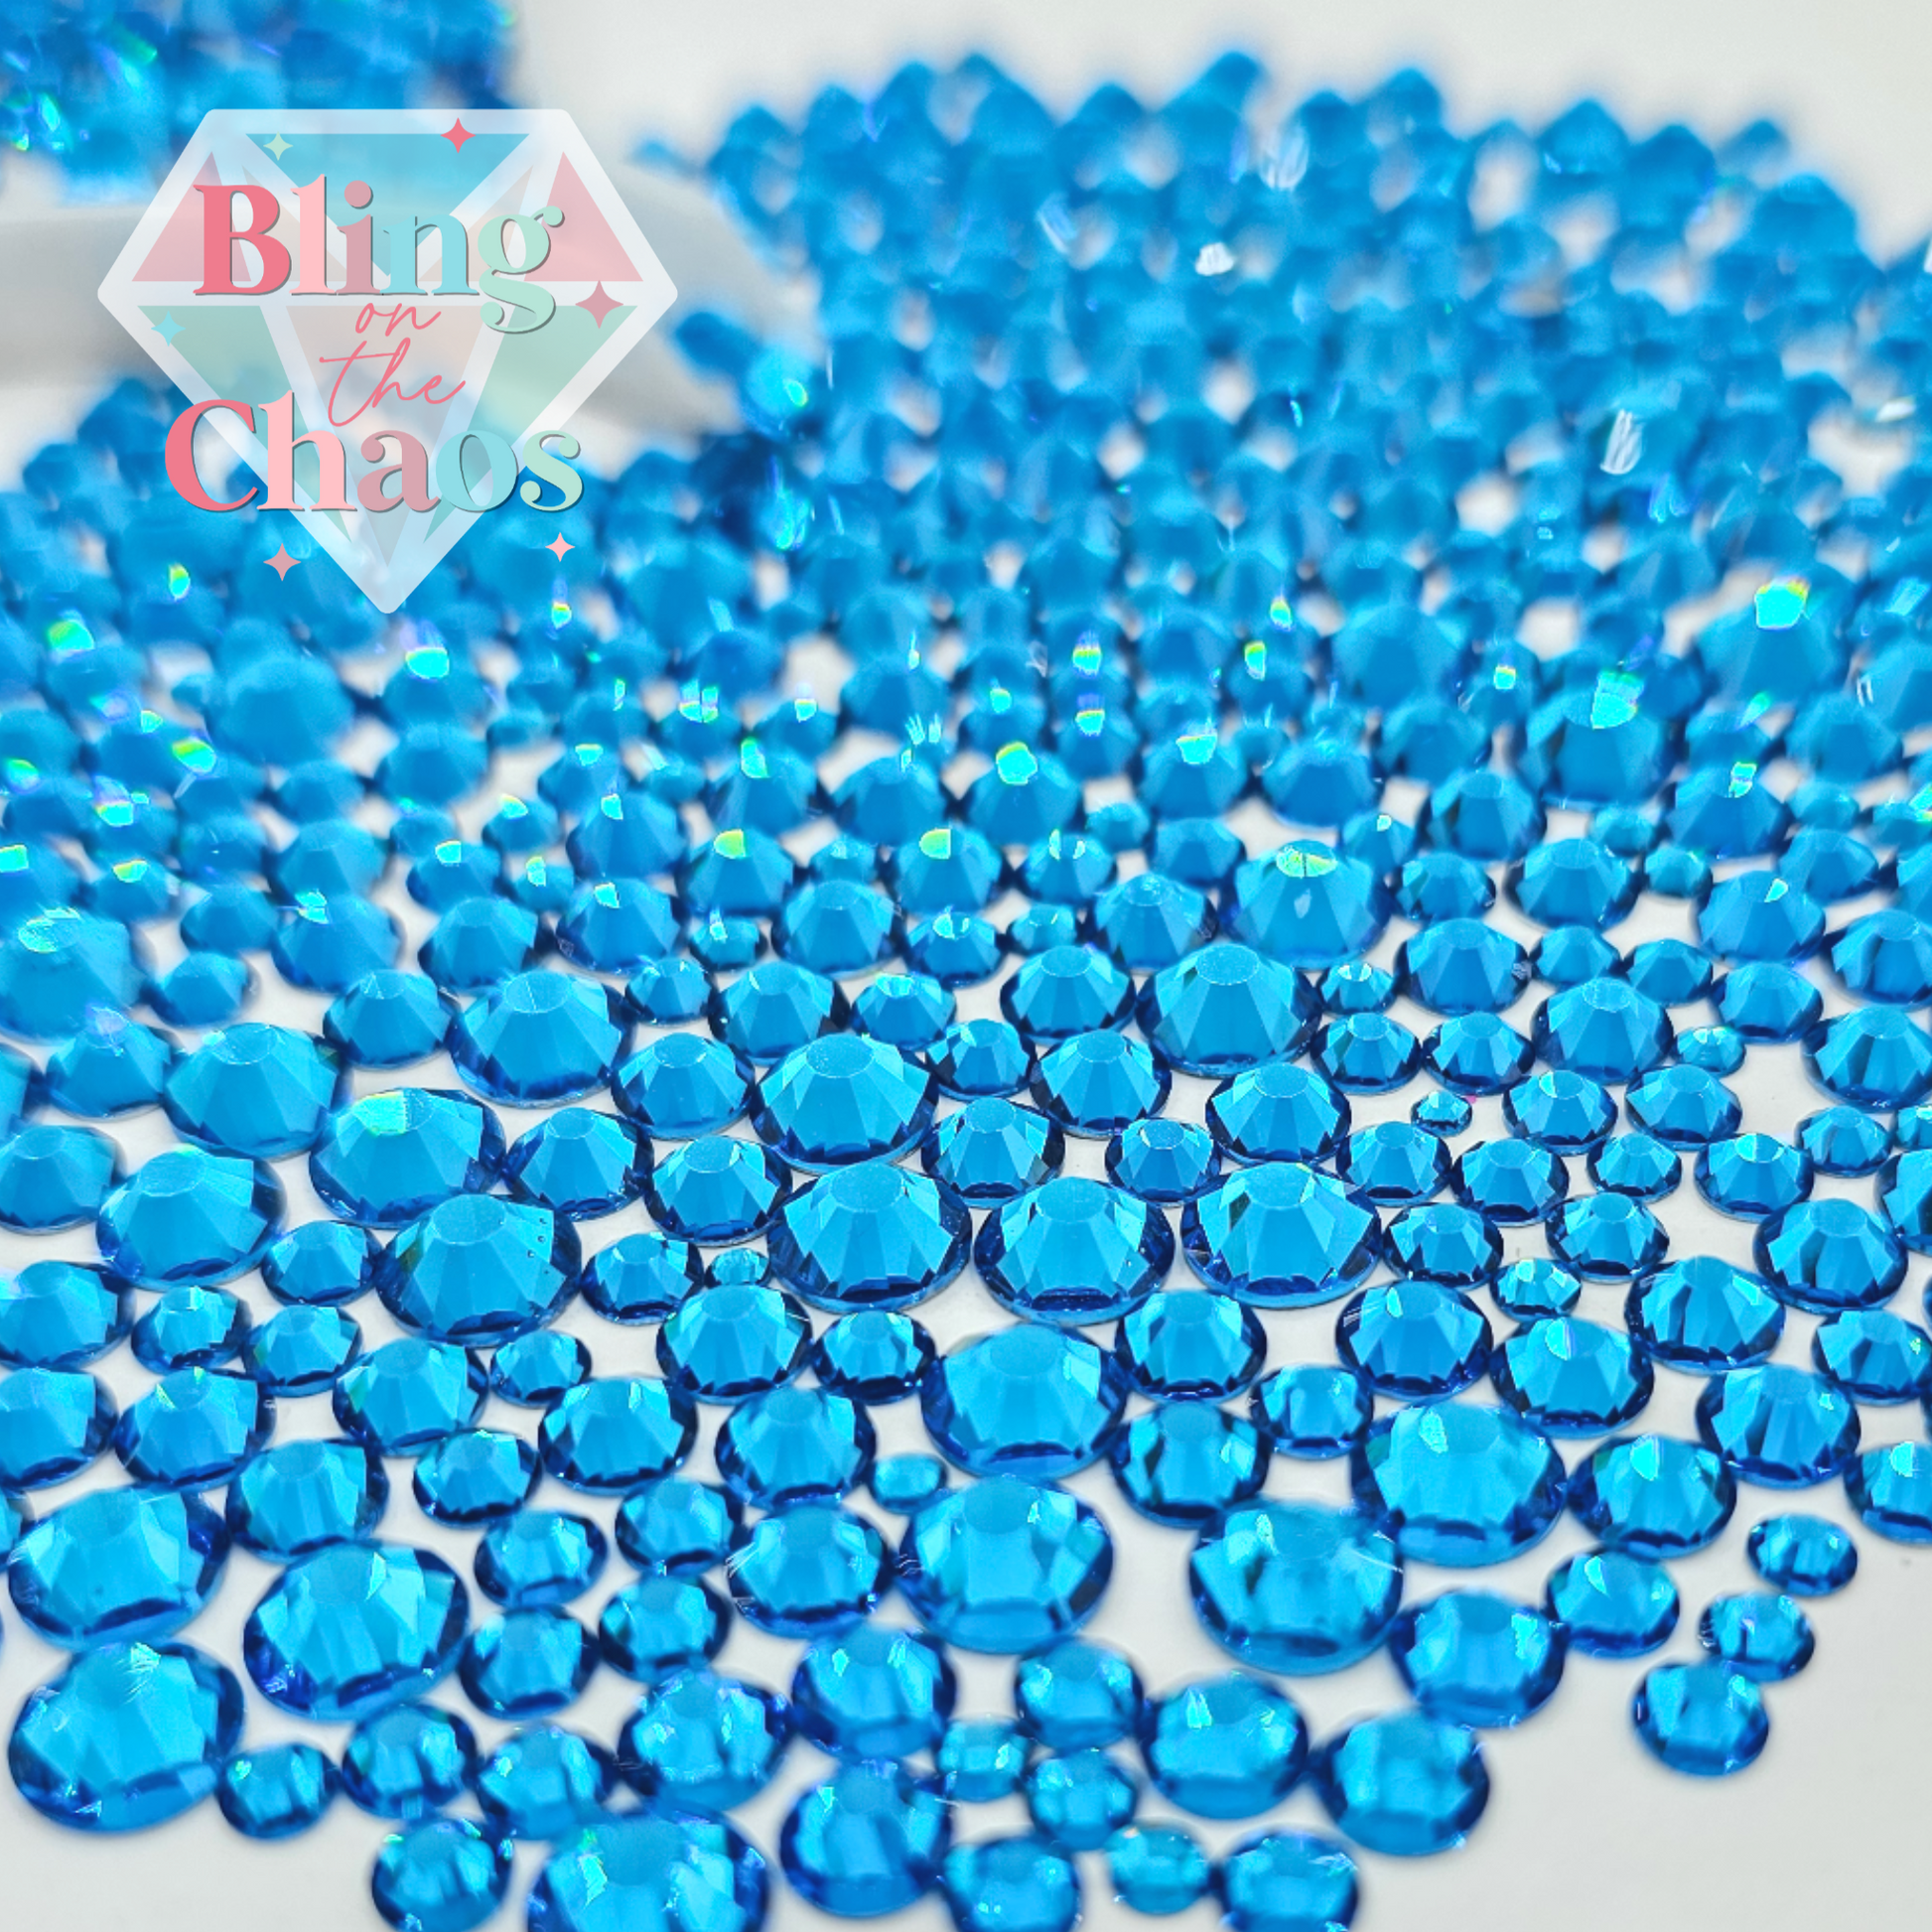 Capri Blue Specialty Glass Mix-Glass Rhinestones-Bling on the Chaos